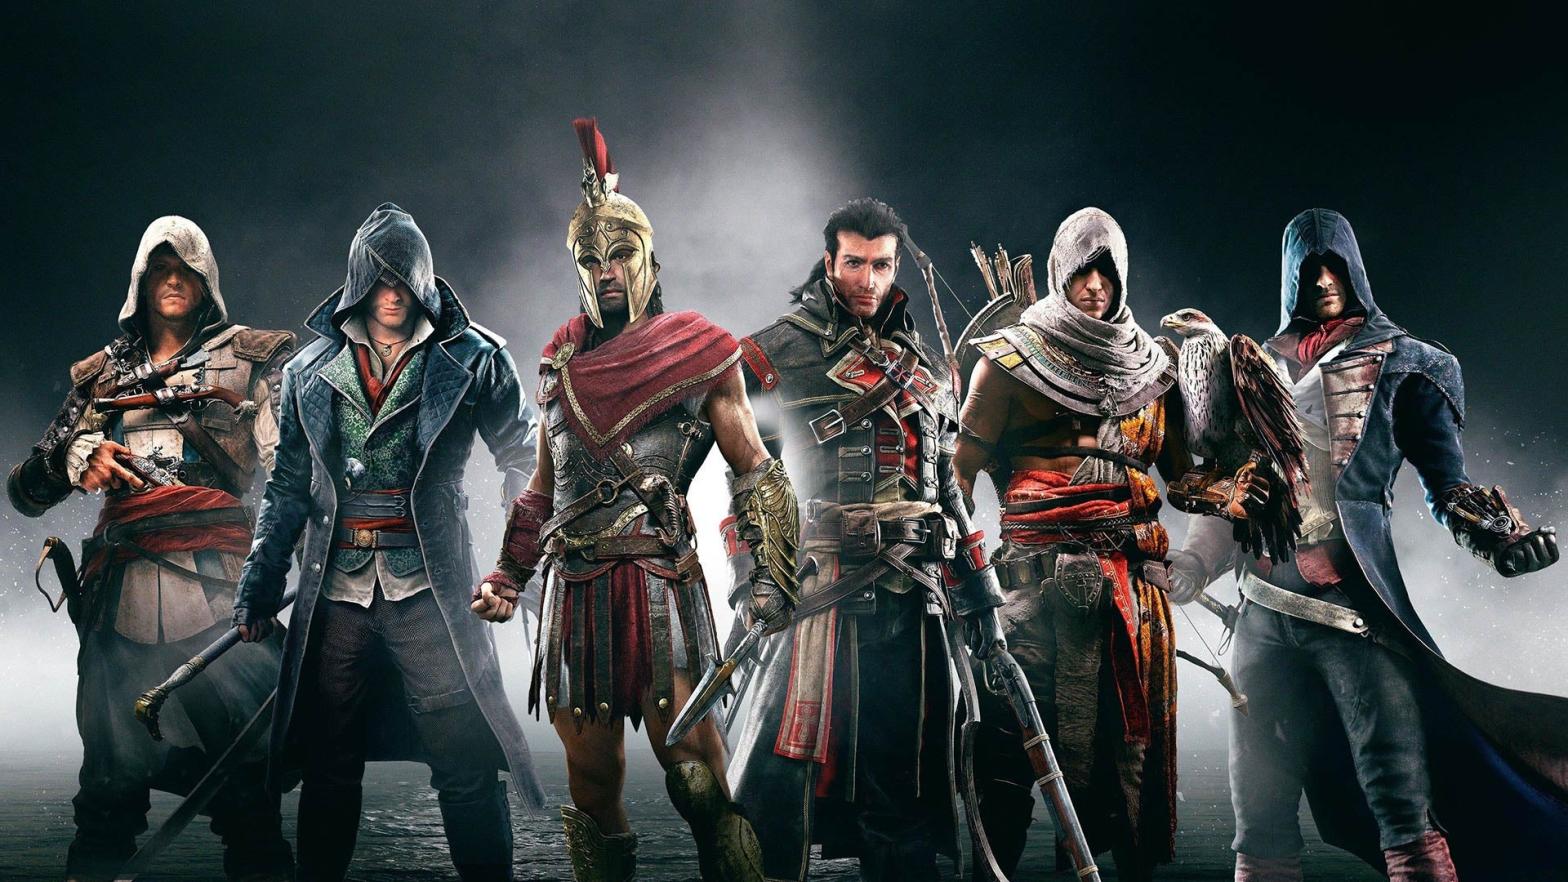 Assassin’s Creed: The Entire Series Ranked From Worst To Best